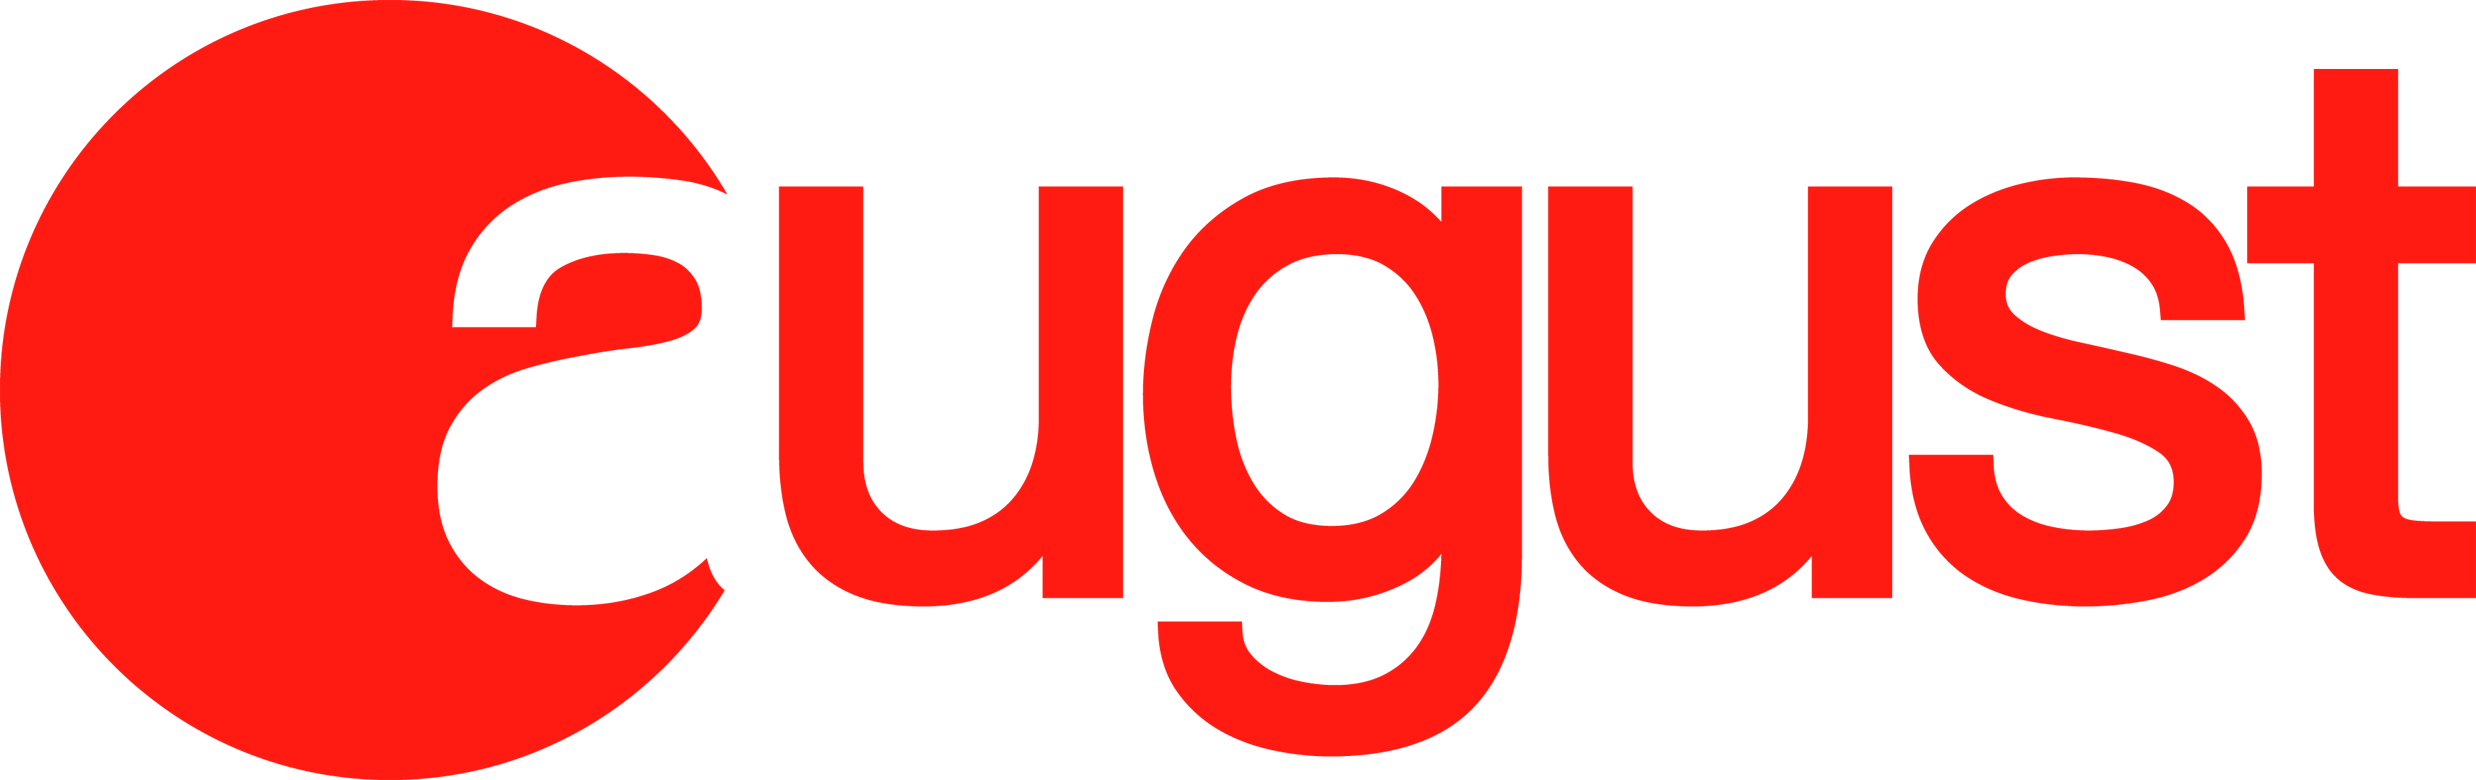 AugustLogoLarge.png